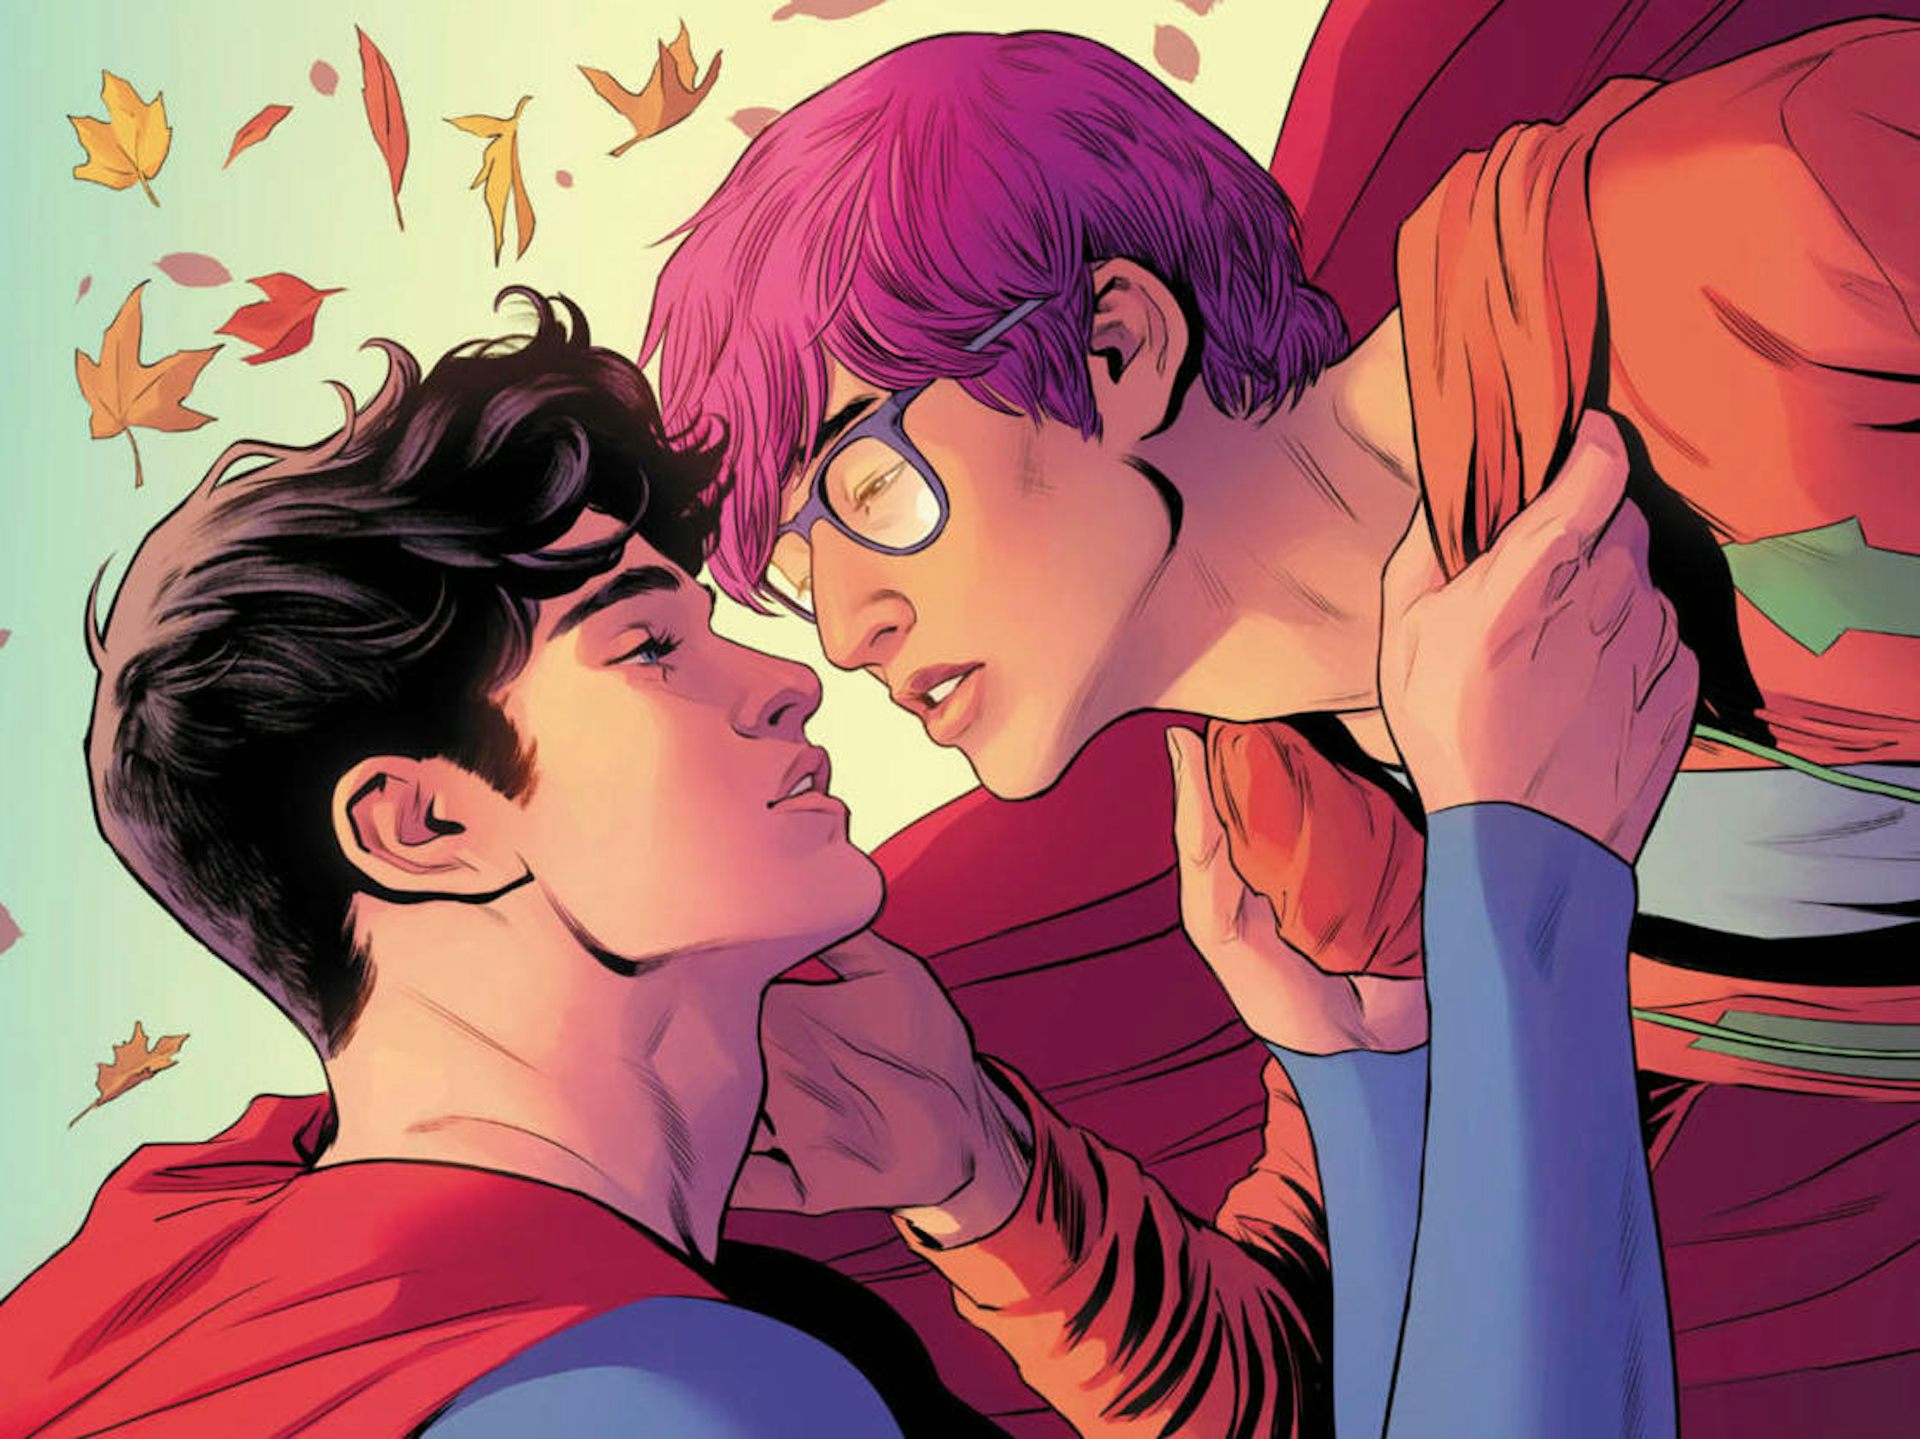 Supermans not the first hero to be portrayed as bisexual, but hell bring hope to LGBTQ+ fans